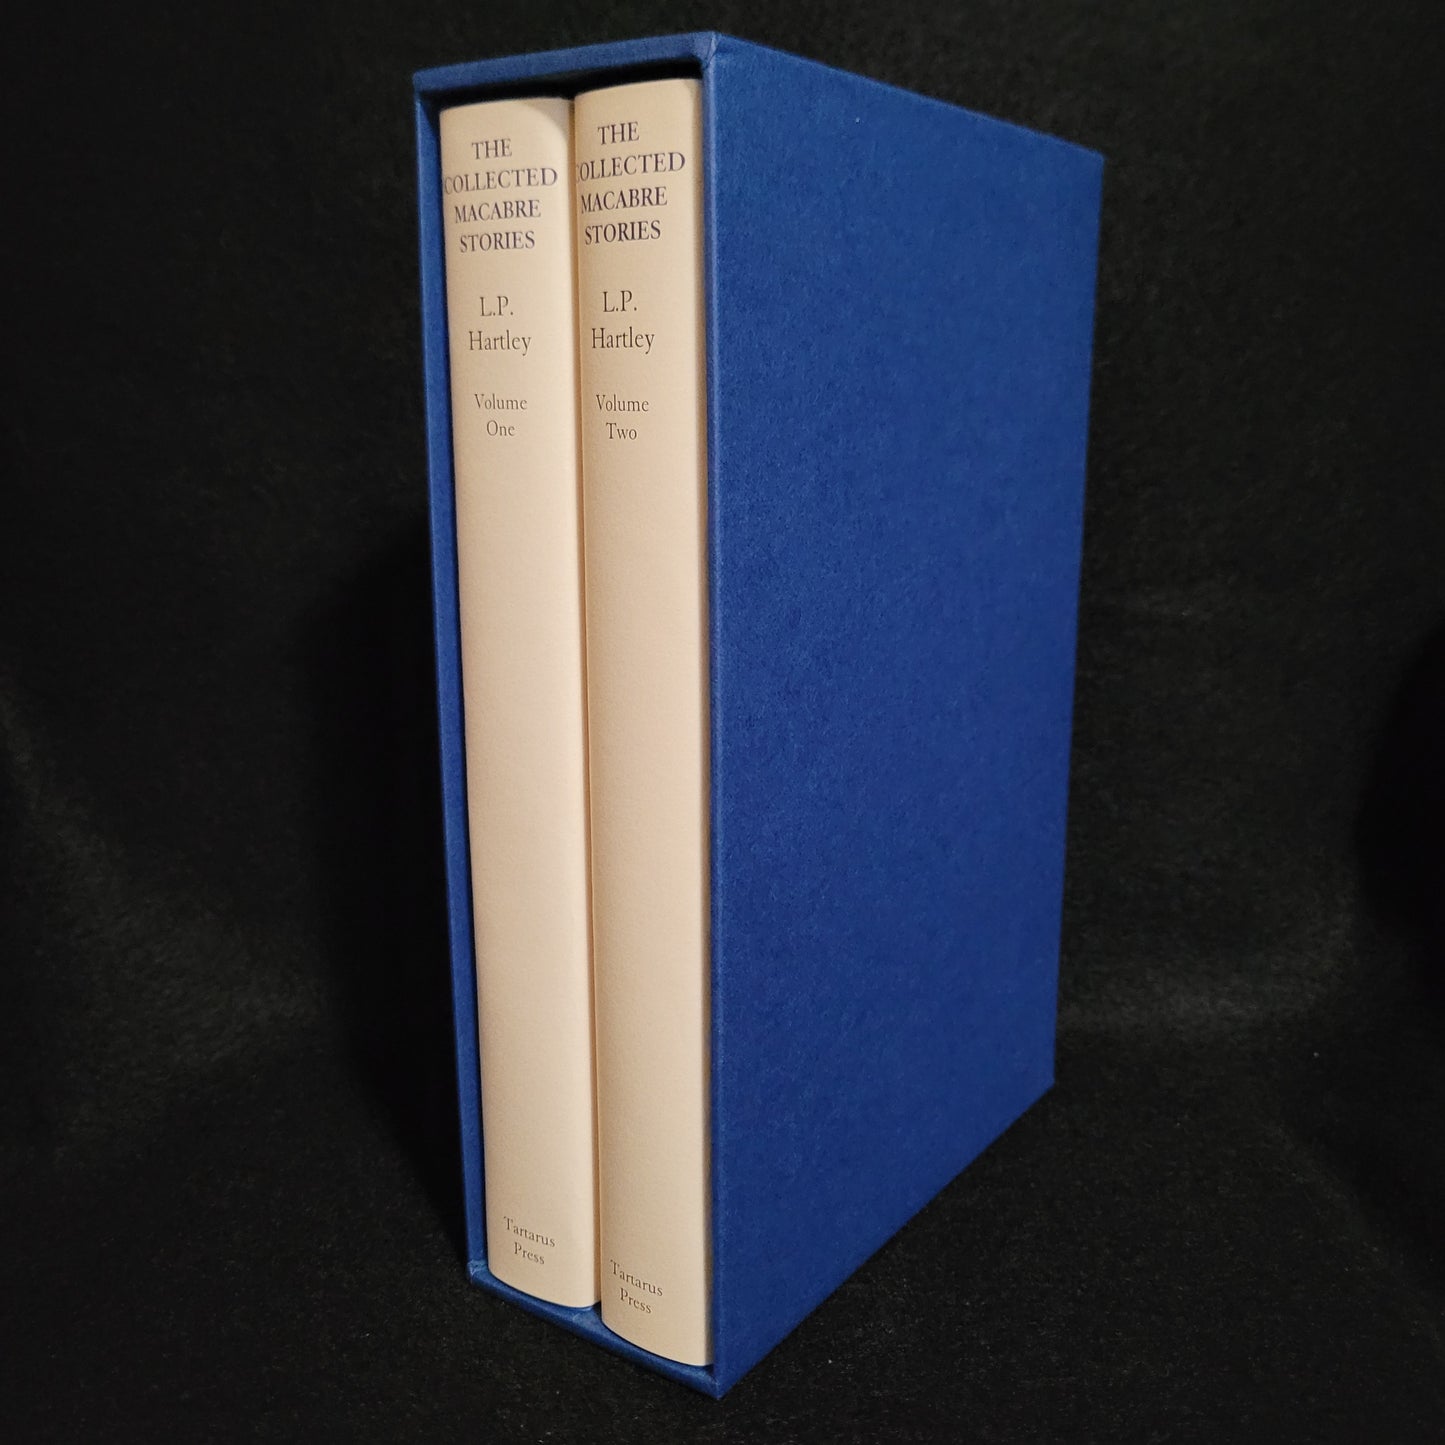 The Collected Macabre Stories of L.P. Hartley (Tartarus Press, 2023) Two Hardcover Volumes in a Slipcase